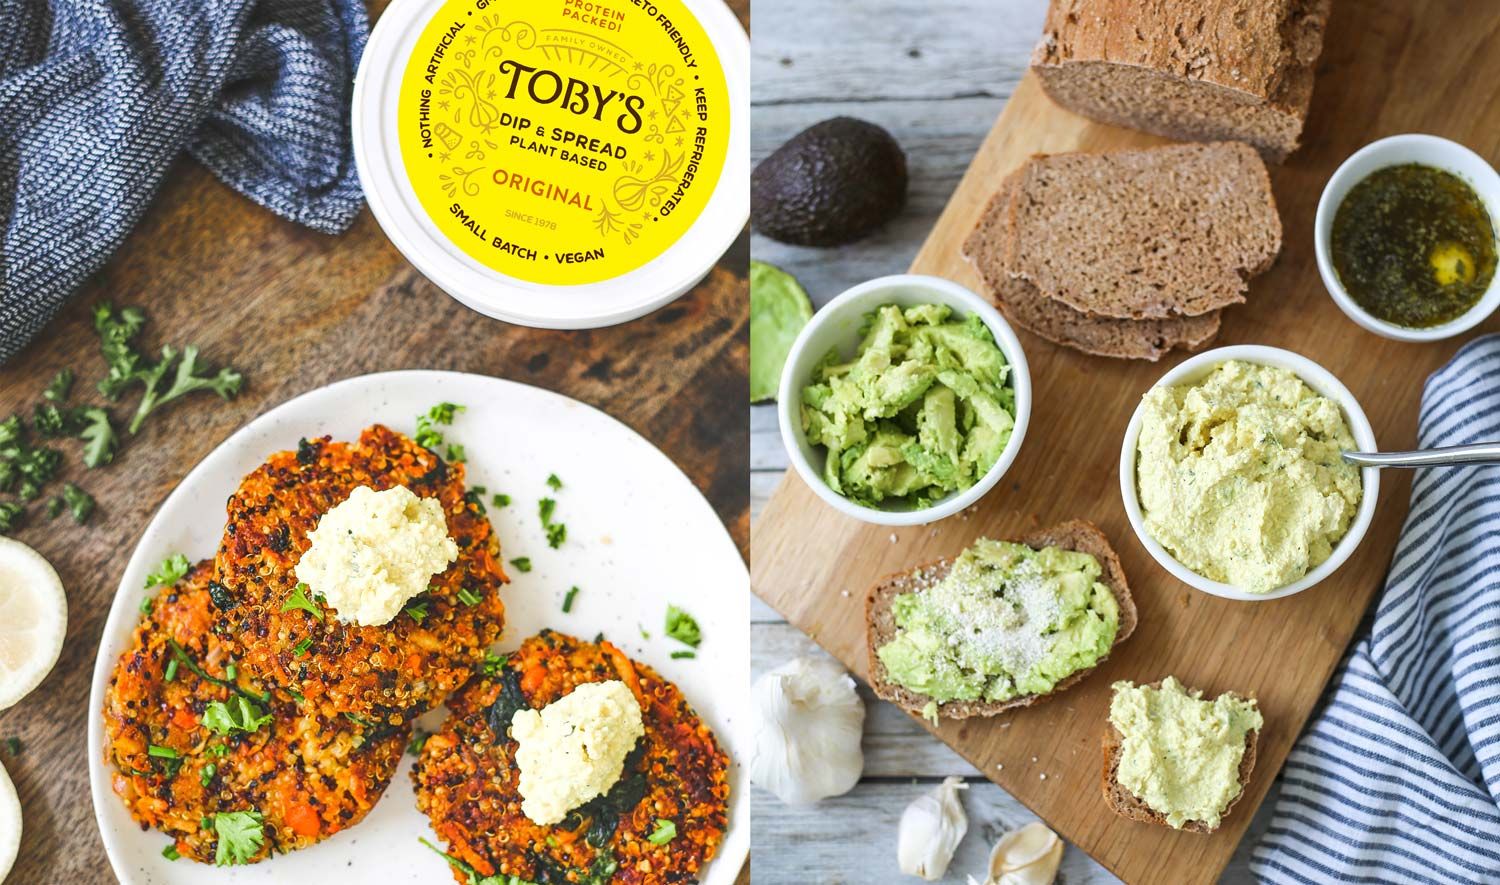 Toby's Plant Based Dip & Spread is protein packed